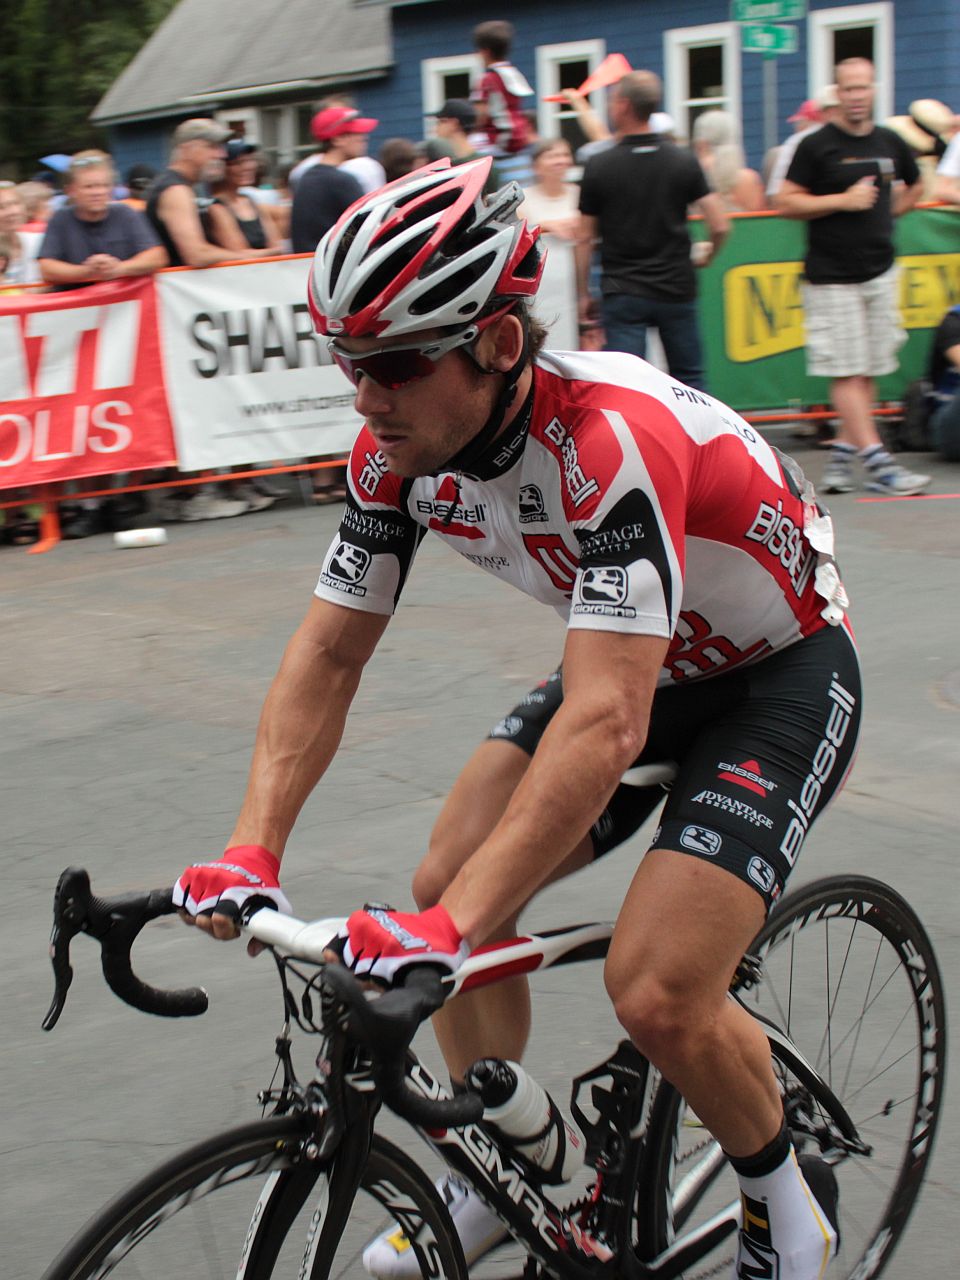 a bicyclist is taking off from the starting line